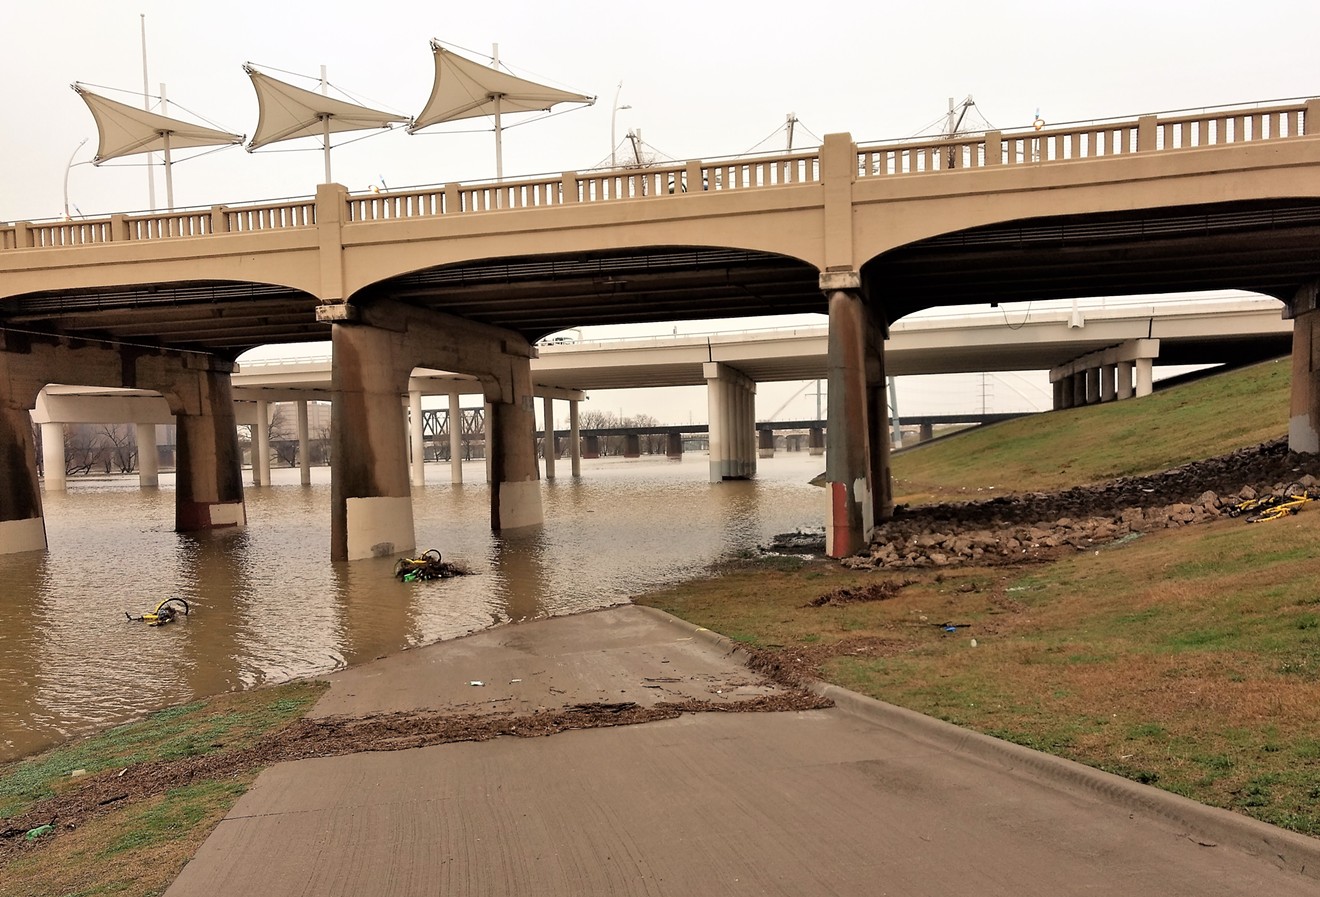 The problem with the Trinity River floodway is that when it rains, a whole lot the floodway floods. Well, actually, that's not a problem, really, because flooding is what floodways are supposed to do. But it's why you don't want to build your house out there.